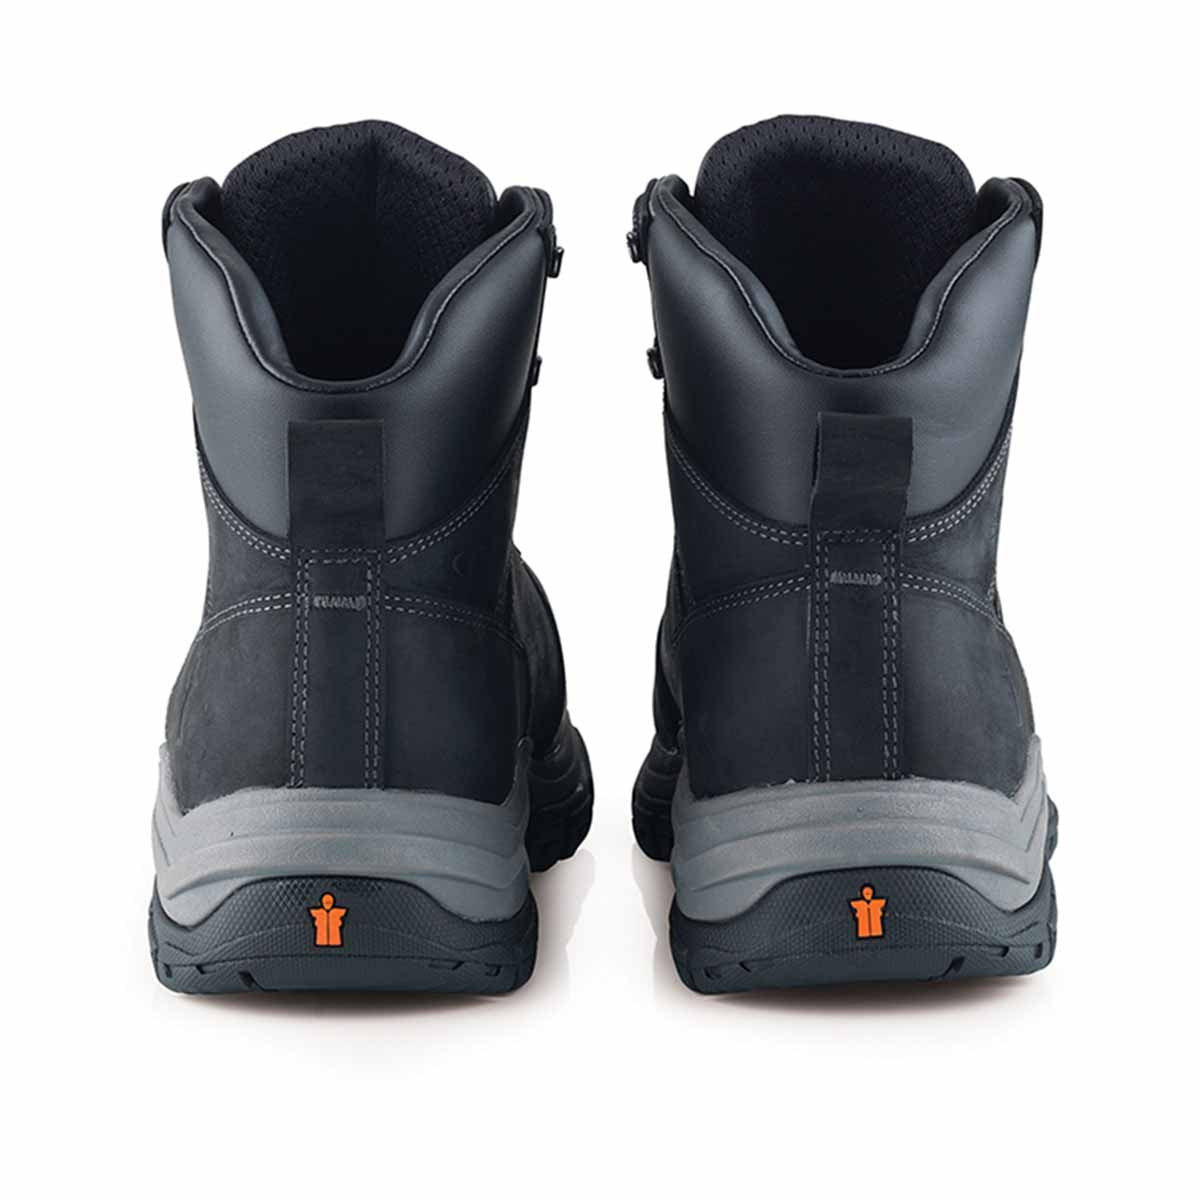 Scruffs Rafter Safety Boots Black Size 7-12